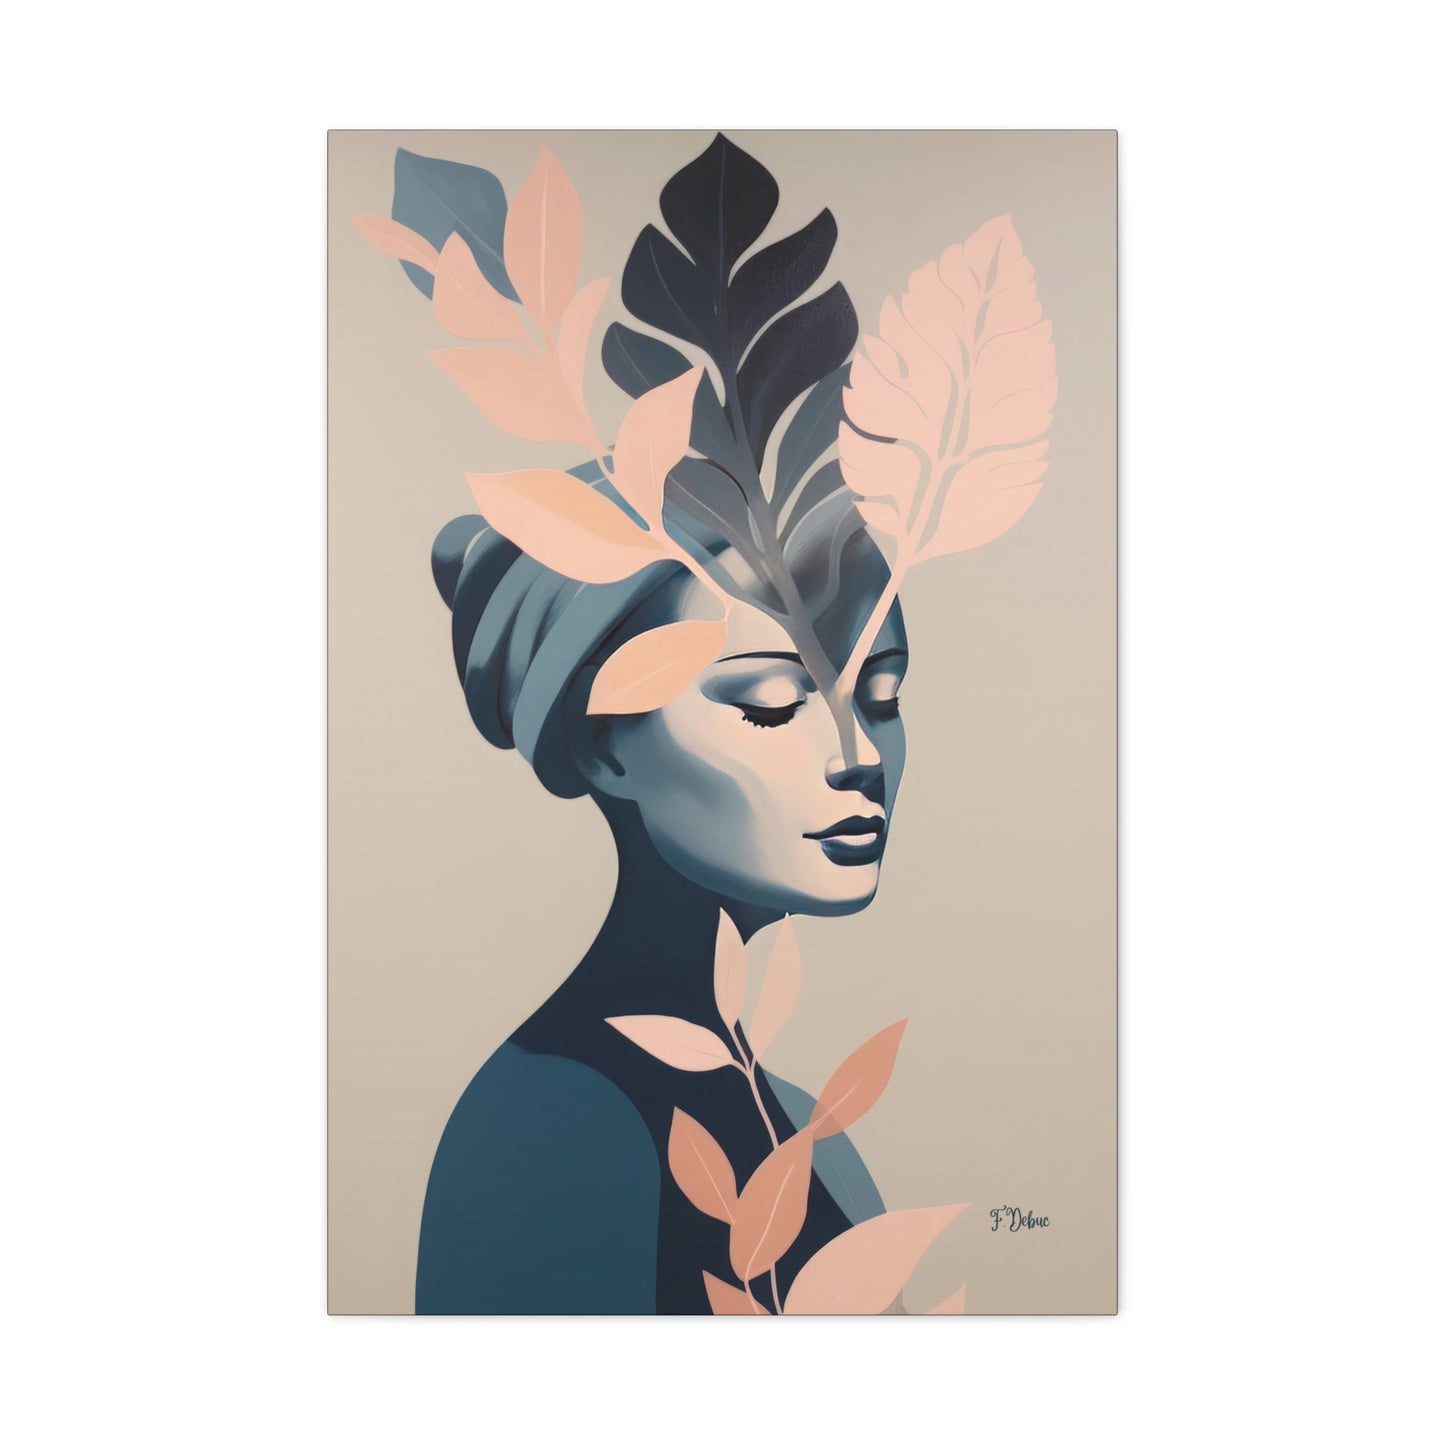 This fine art print wall décor features a woman crowned with beautiful leaves, exuding elegance in minimalistic hues.